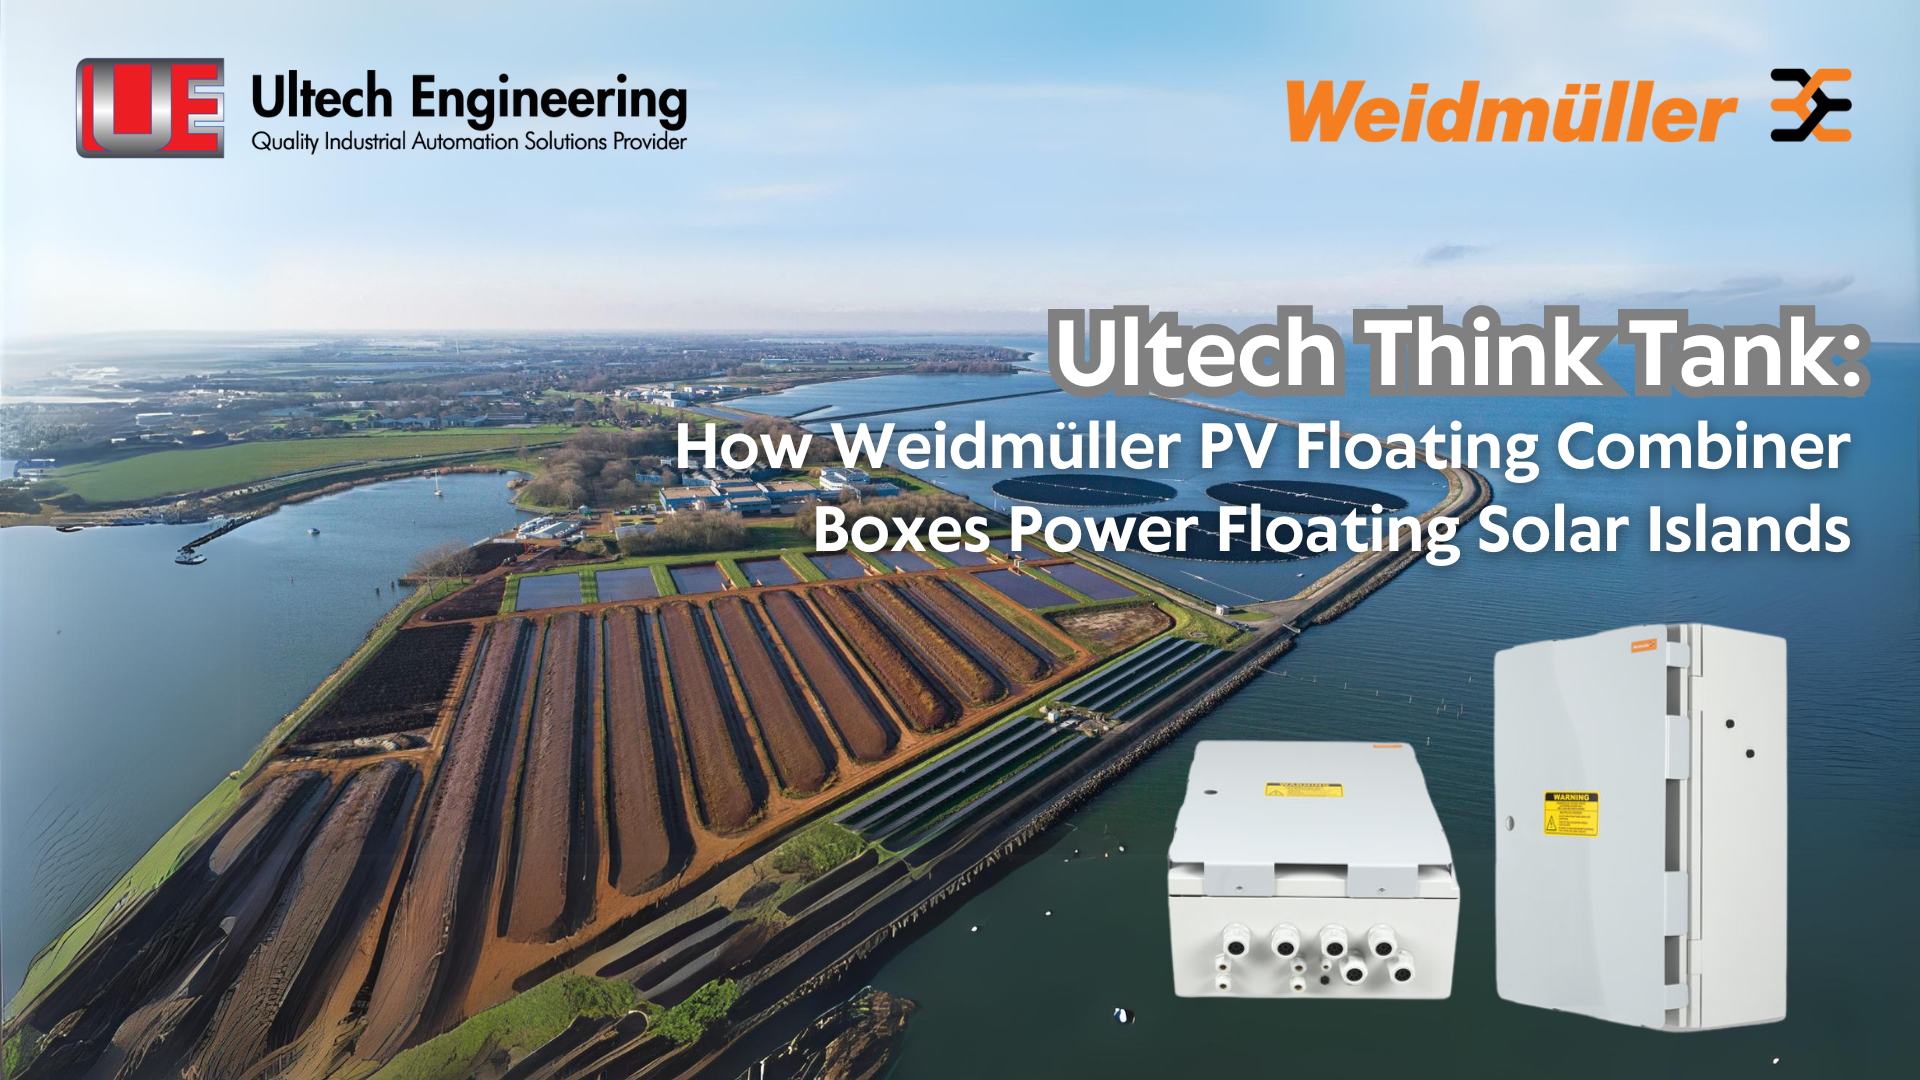 Ultech Think Tank: How Weidmüller PV Floating Combiner Boxes Power Floating Solar Islands